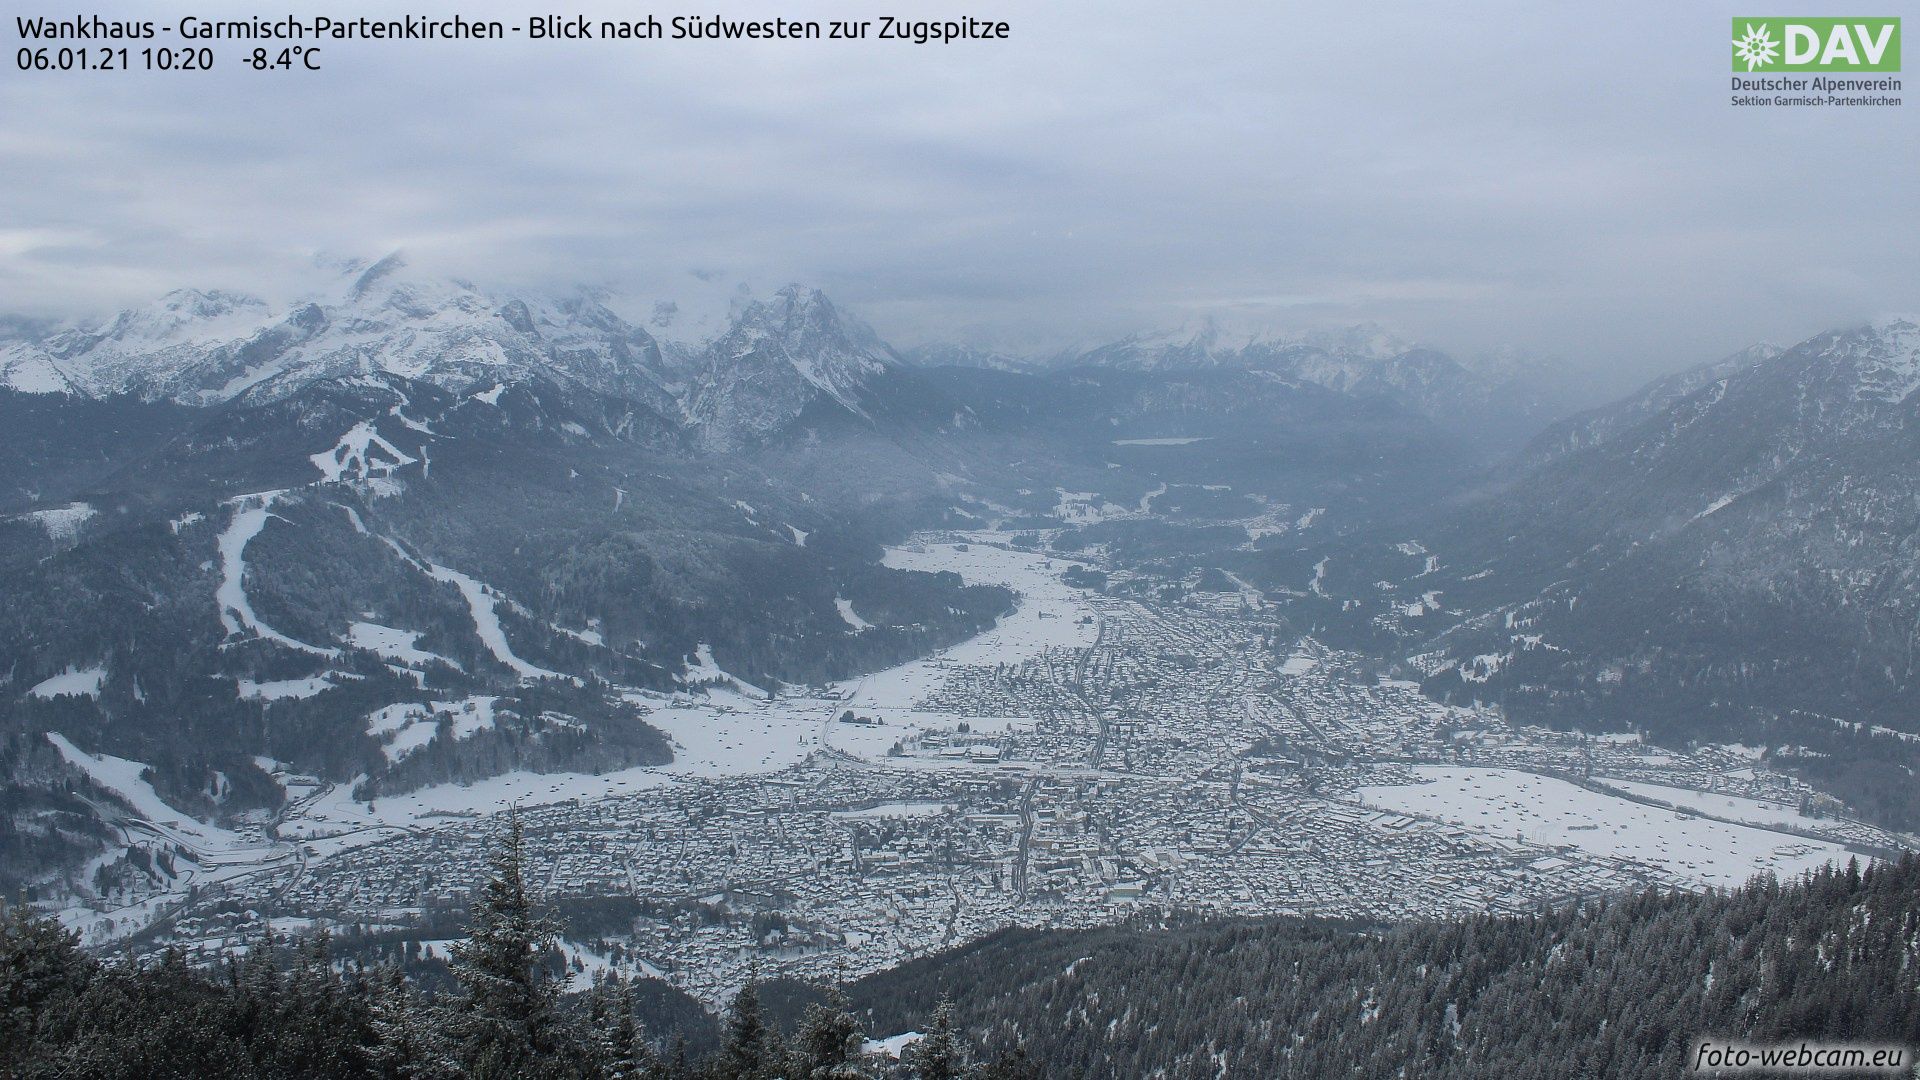 The snowfall in many parts of the Northern Alps (like here in Garmisch) has resulted in nothing more than some dust on crust